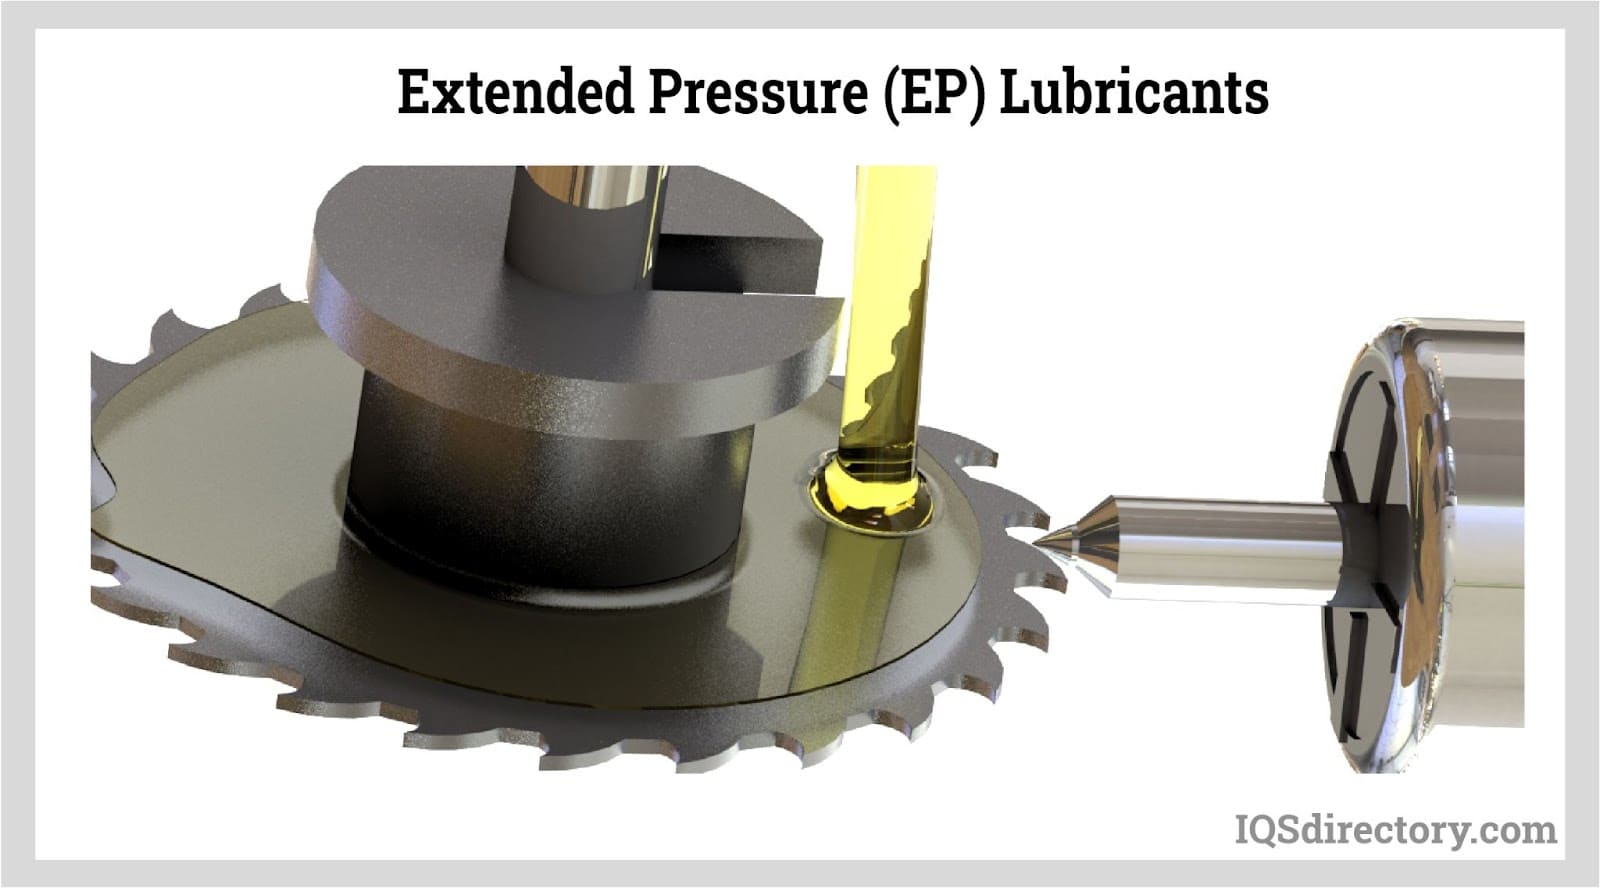 Extended Pressure (EP) Lubricants